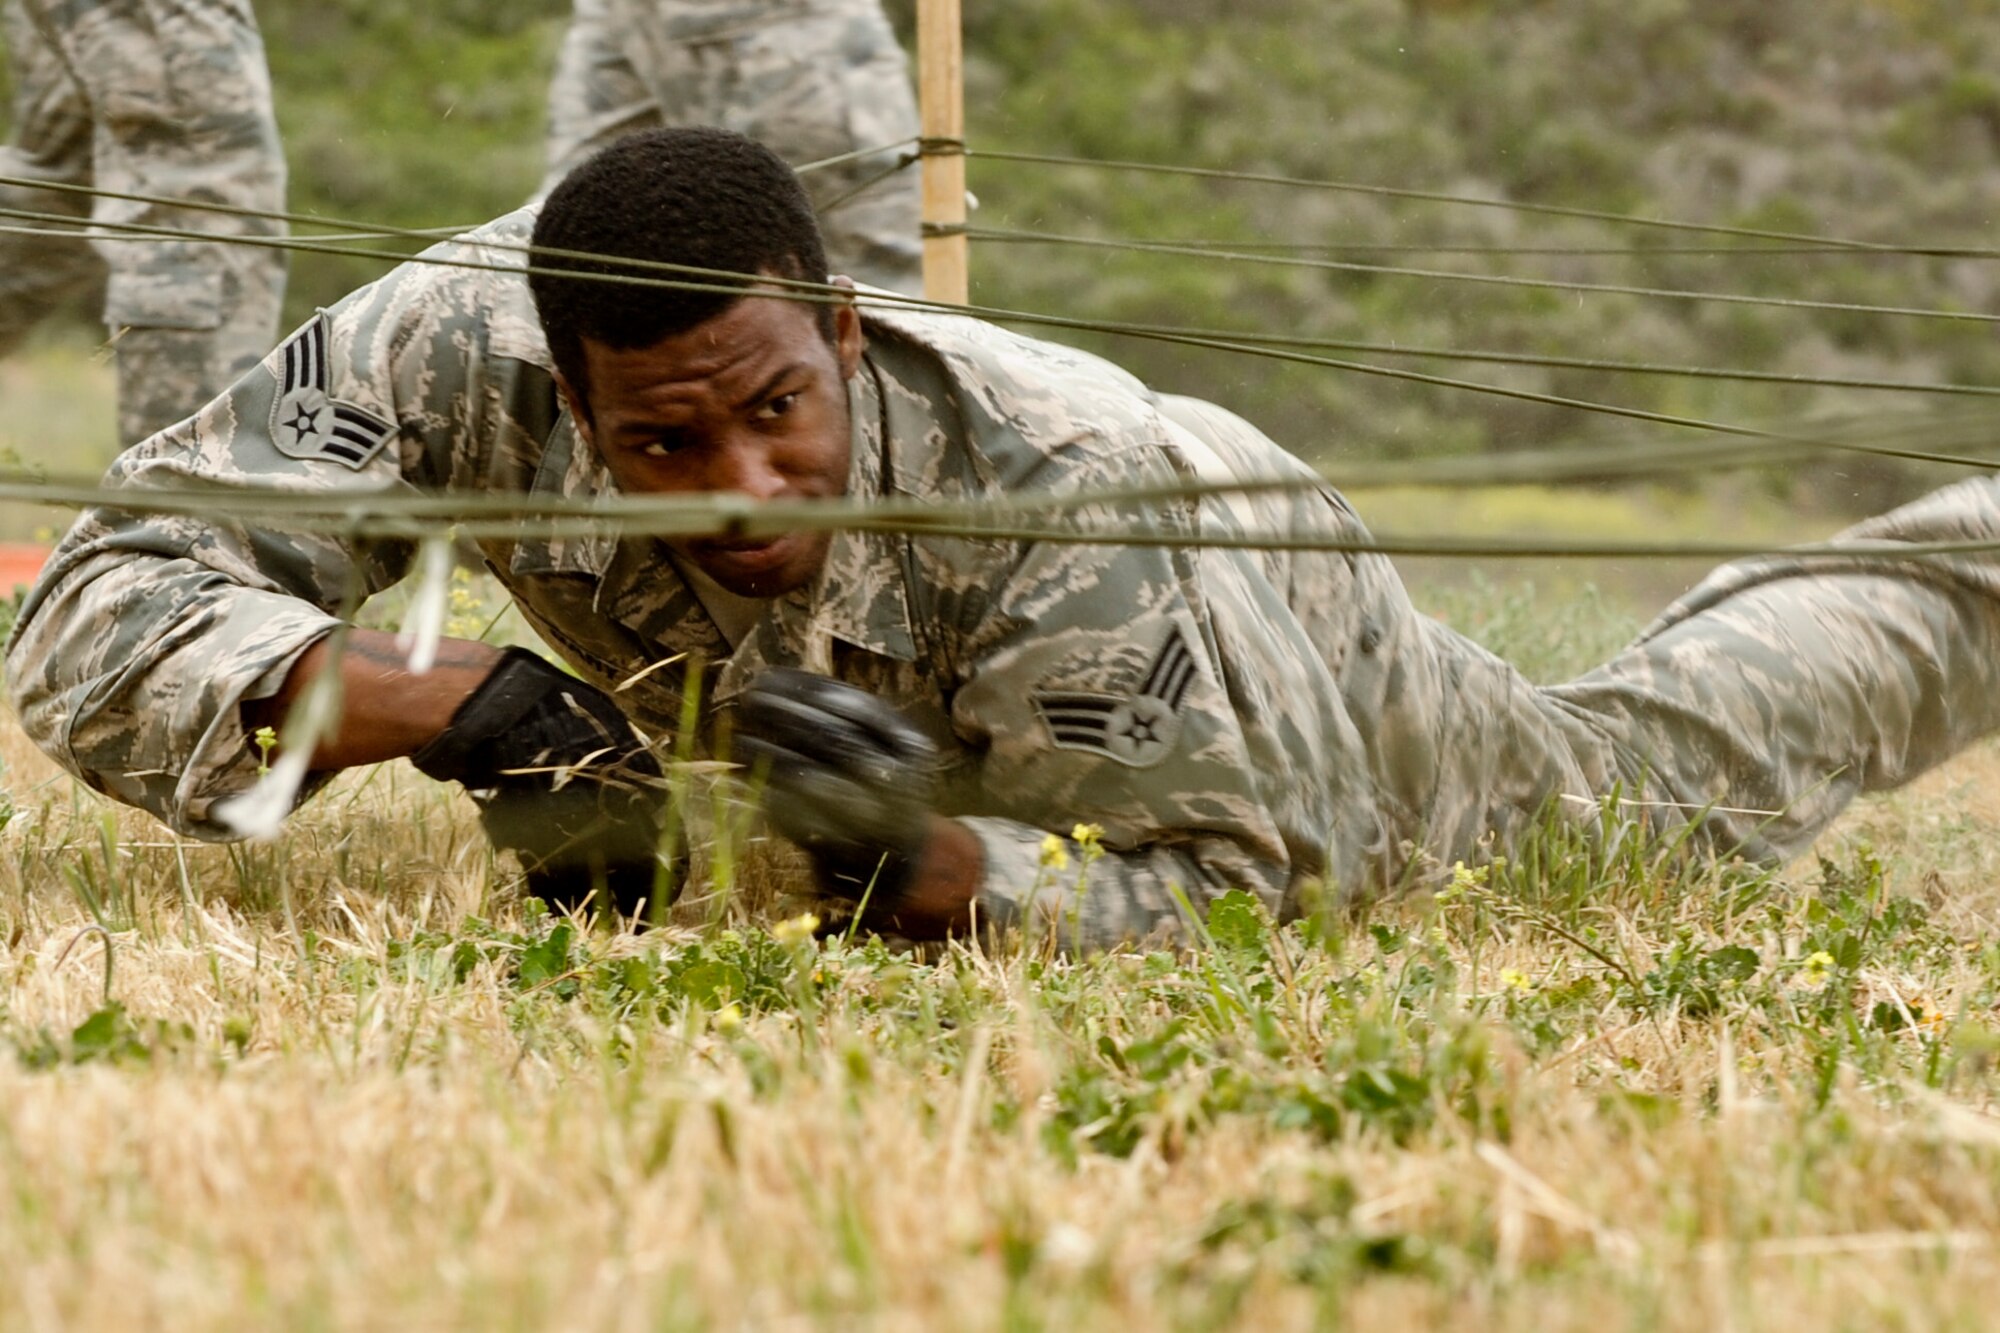 VANDENBERG AIR FORCE BASE, Calif. – Senior Airman Matthew Gary, a 30th Security Forces Squadron response force member, low crawls during a competition for National Police Week here Tuesday, May 14, 2013. The 30th Security Forces Squadron held this year’s West Coast Warrior Challenge Competition as part of their National Police Week ceremonies, meant to honor law enforcement officers who have lost their lives in the line of duty. (U.S. Air Force photo/Airman Yvonne Morales)